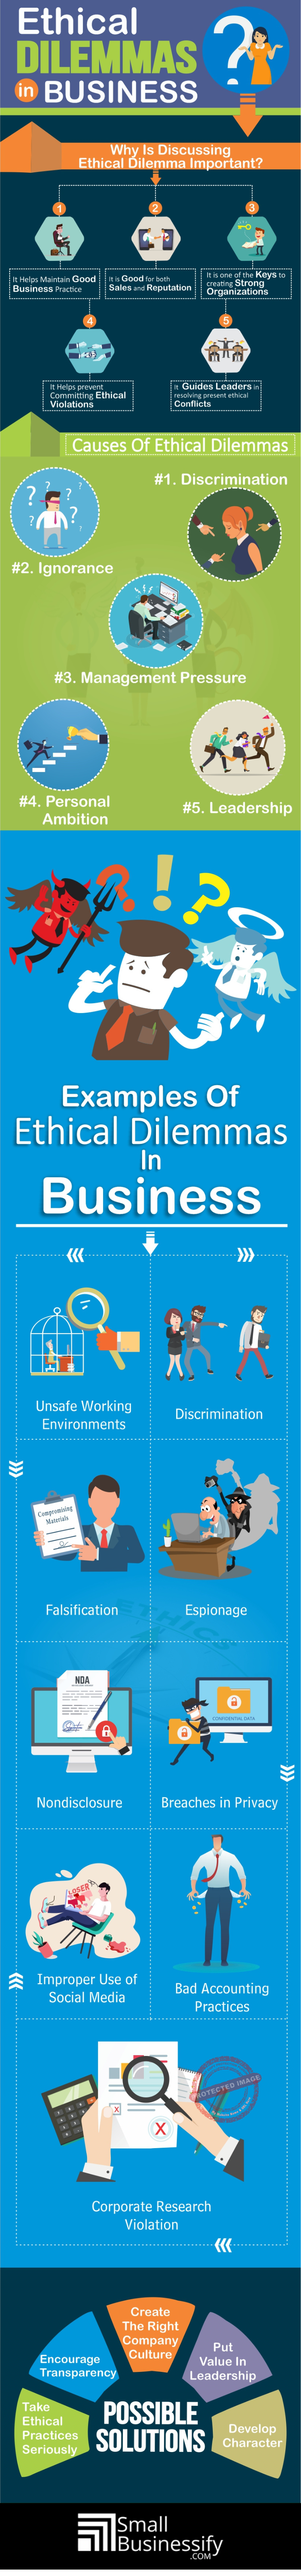 Ethical Dilemmas In Business Infographic